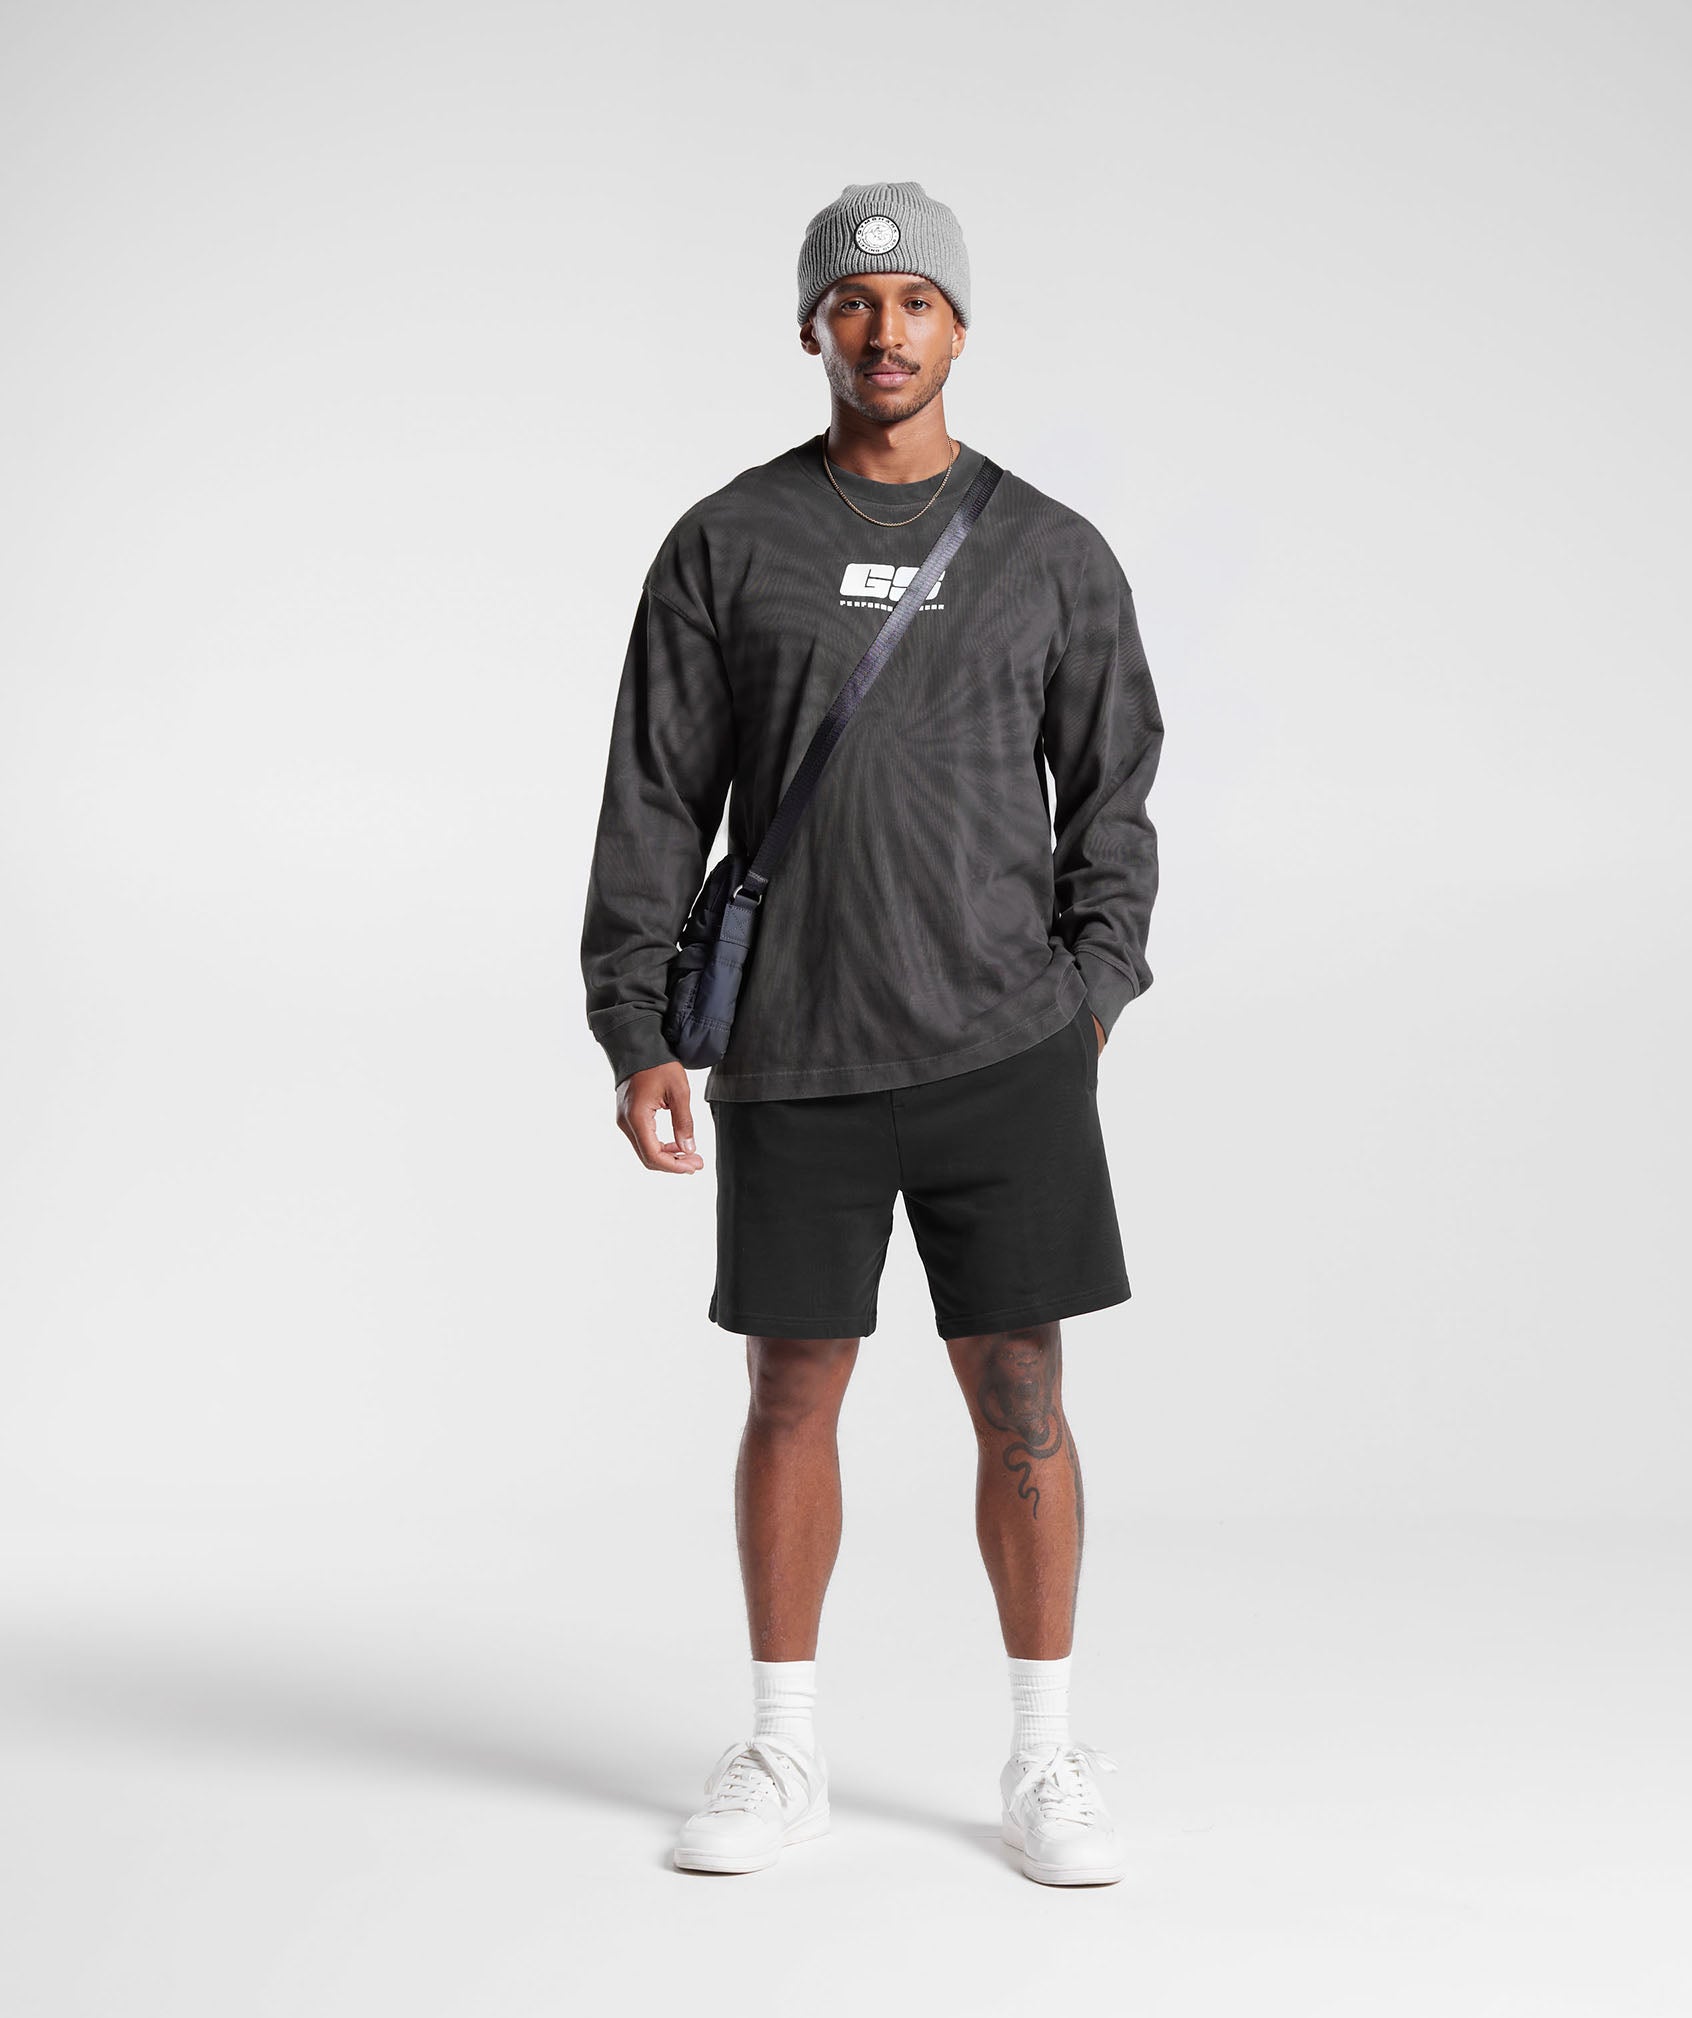 Rest Day Long Sleeve T-Shirt in Silhouette Grey/Black/Spiral Optic Wash - view 4